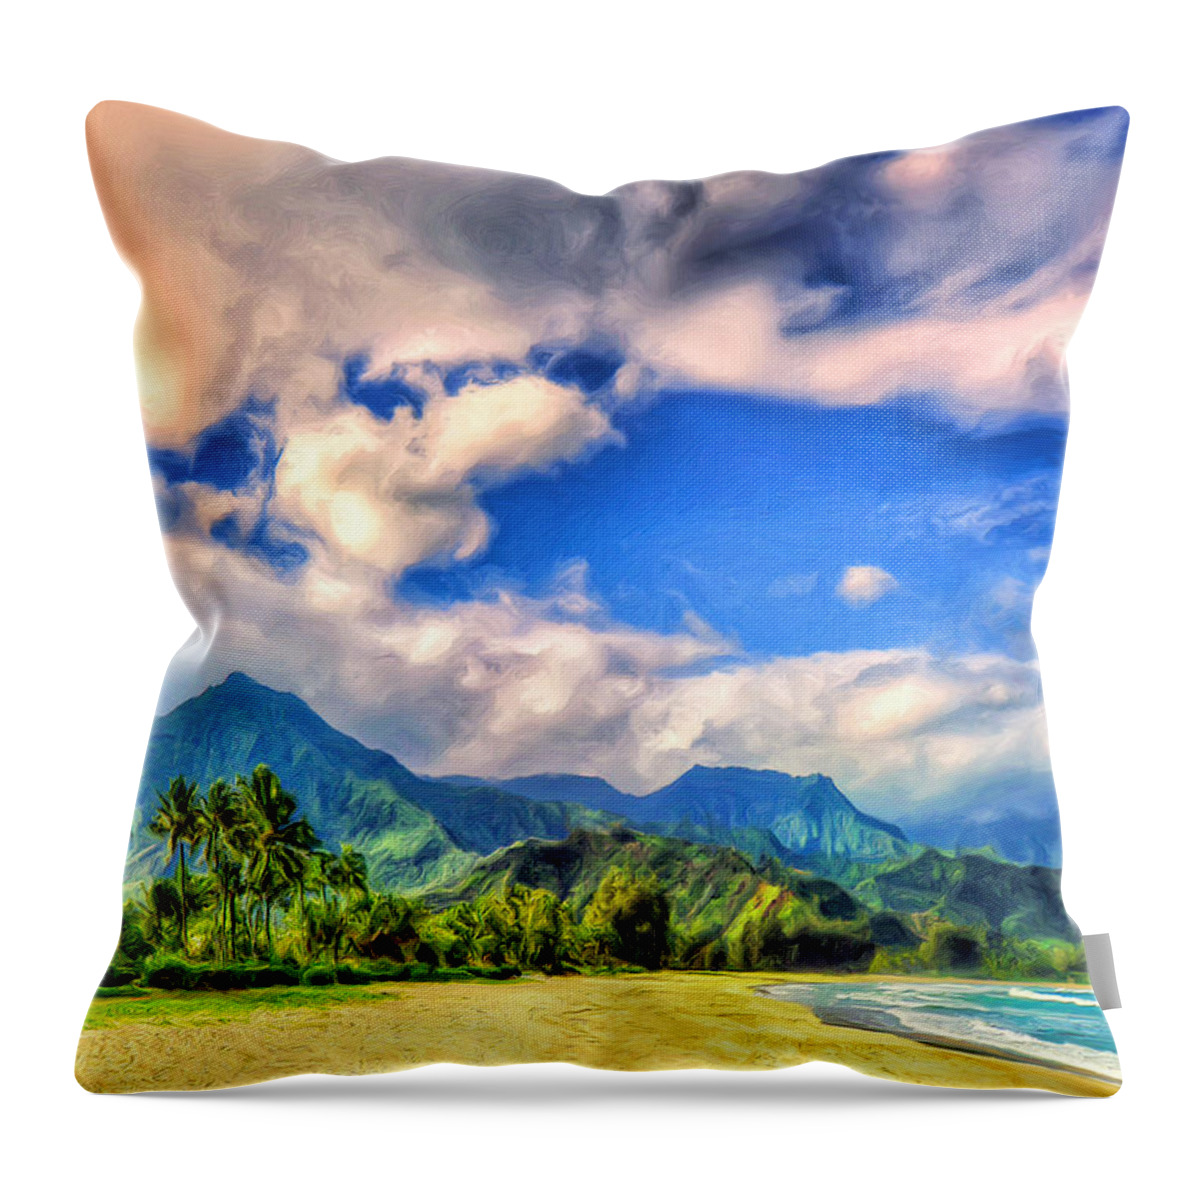 Hanalei Bay Throw Pillow featuring the painting The Beach at Hanalei Bay Kauai by Dominic Piperata